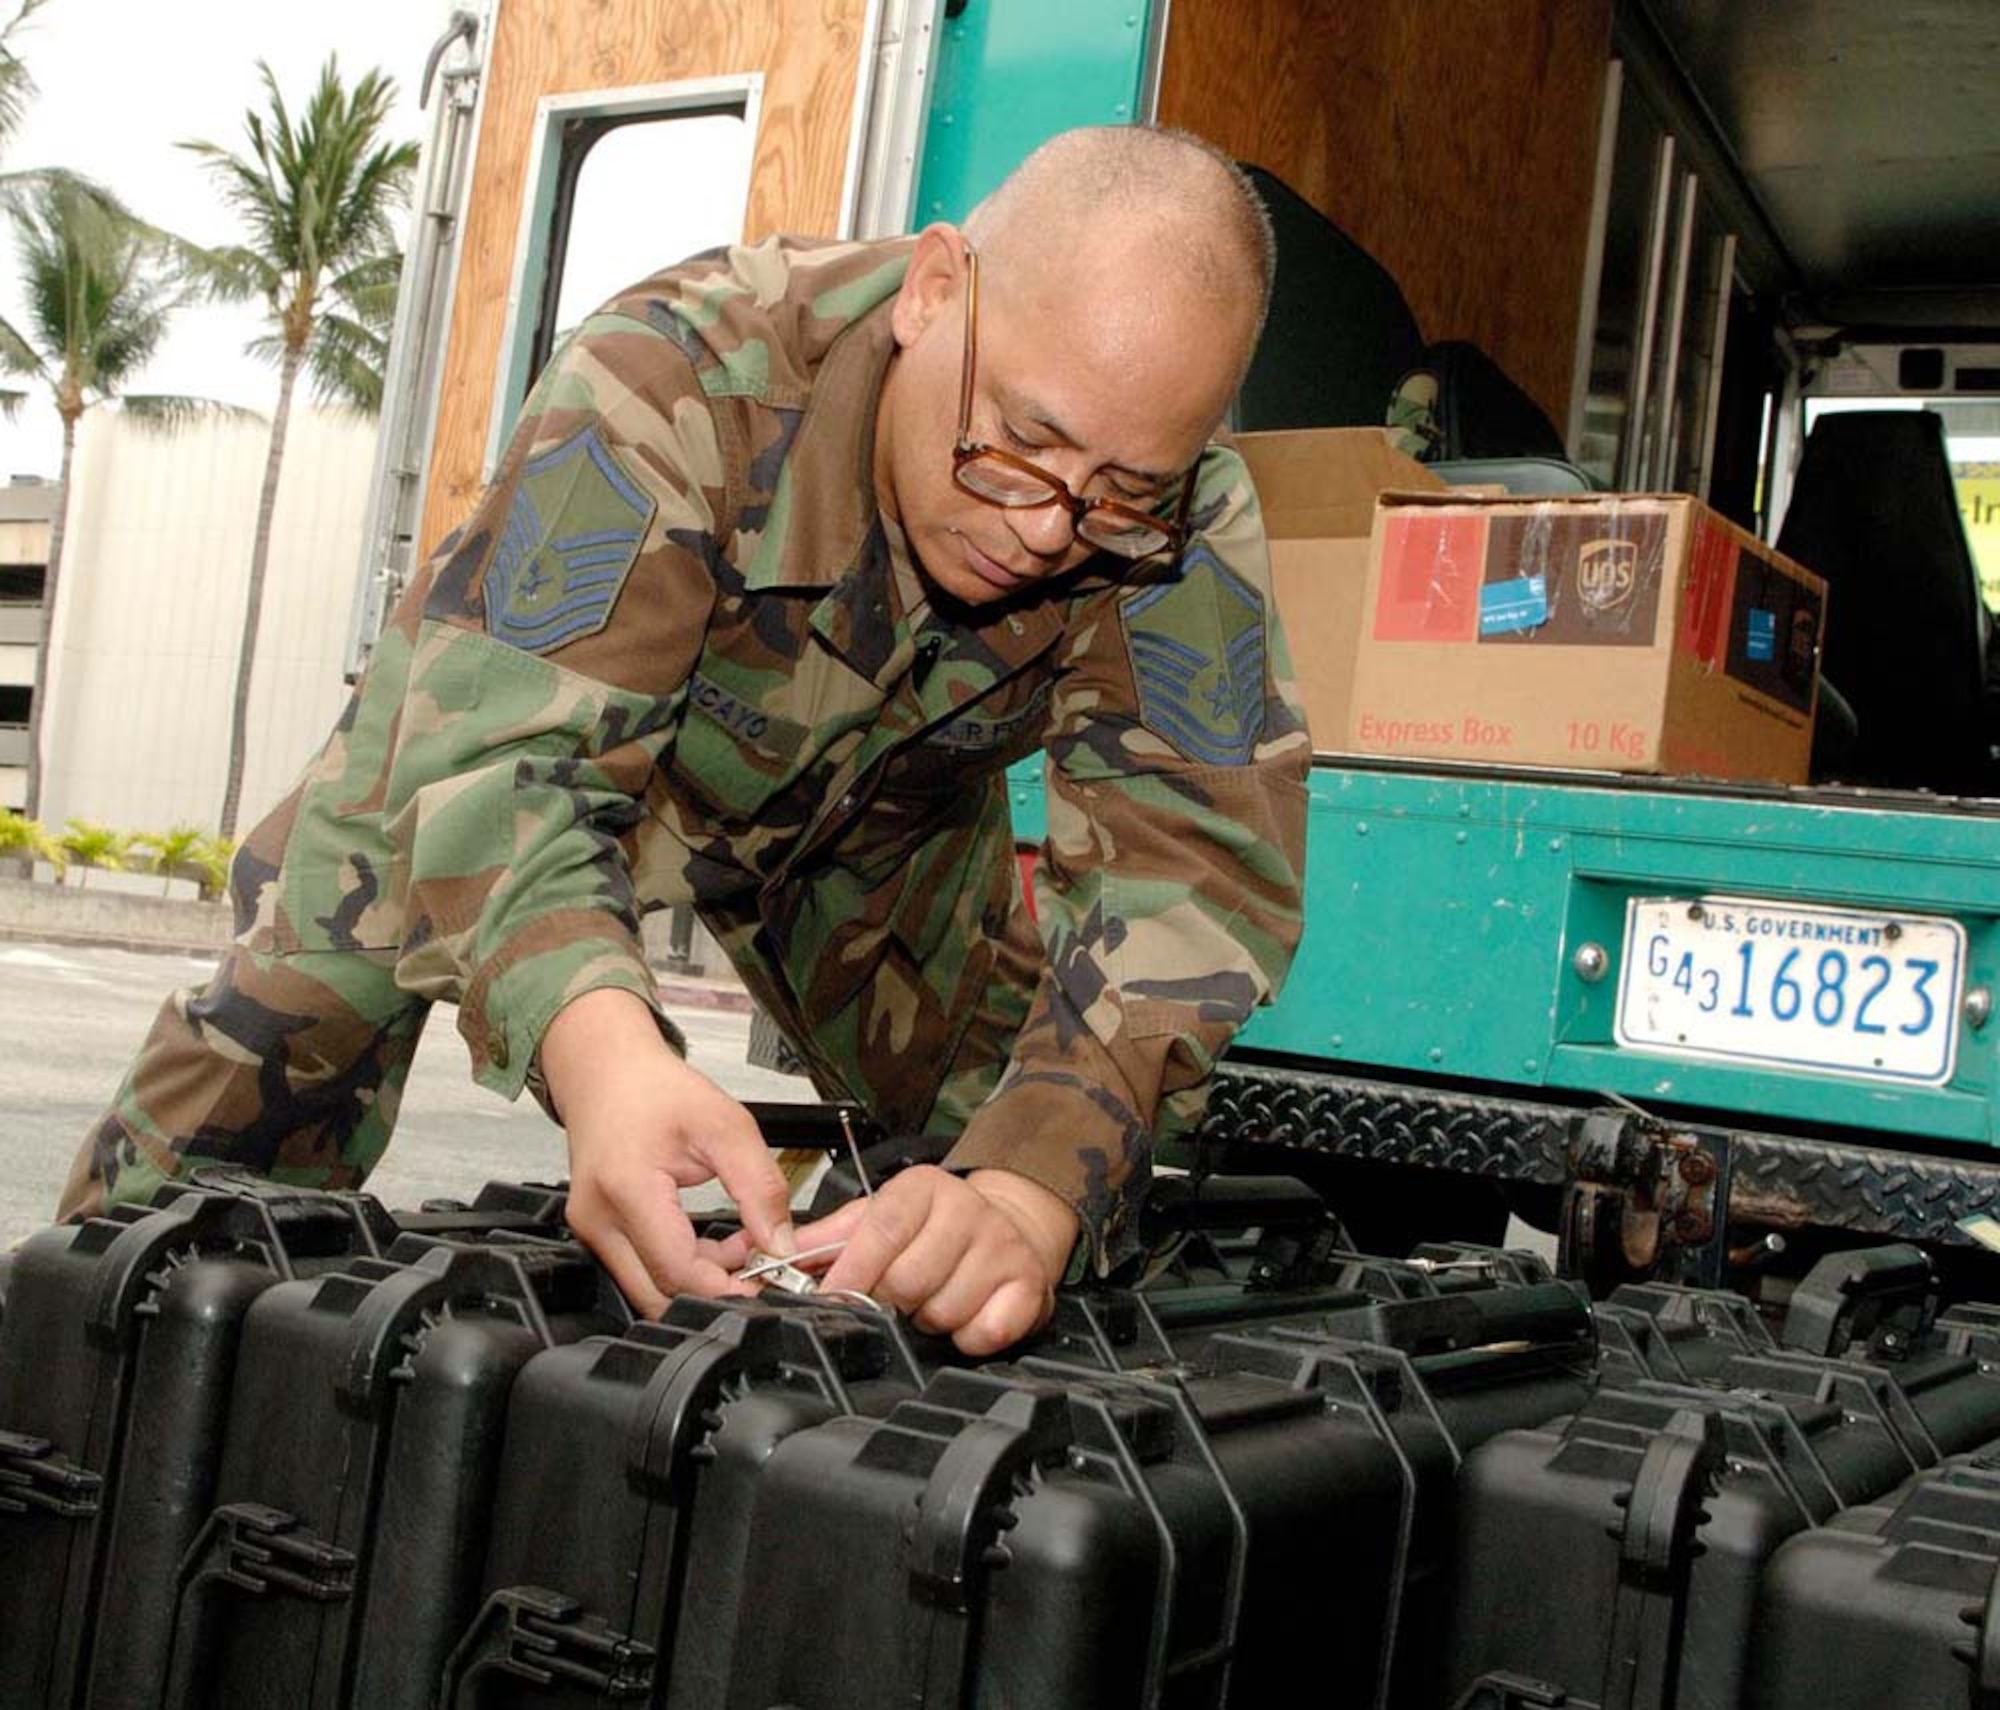 Master Sgt. Robert Tancayo, 624th Civil Engineer Squadron, inspects weapon cases before distributing them to reservists in his squadron July 31, 2009. Fifty-four reservists from the squadron were mobilized for six months and sent to Bagram Airfield, Afghanistan, to support the U.S. Army. (U.S. Air Force photo/Mark Bates)